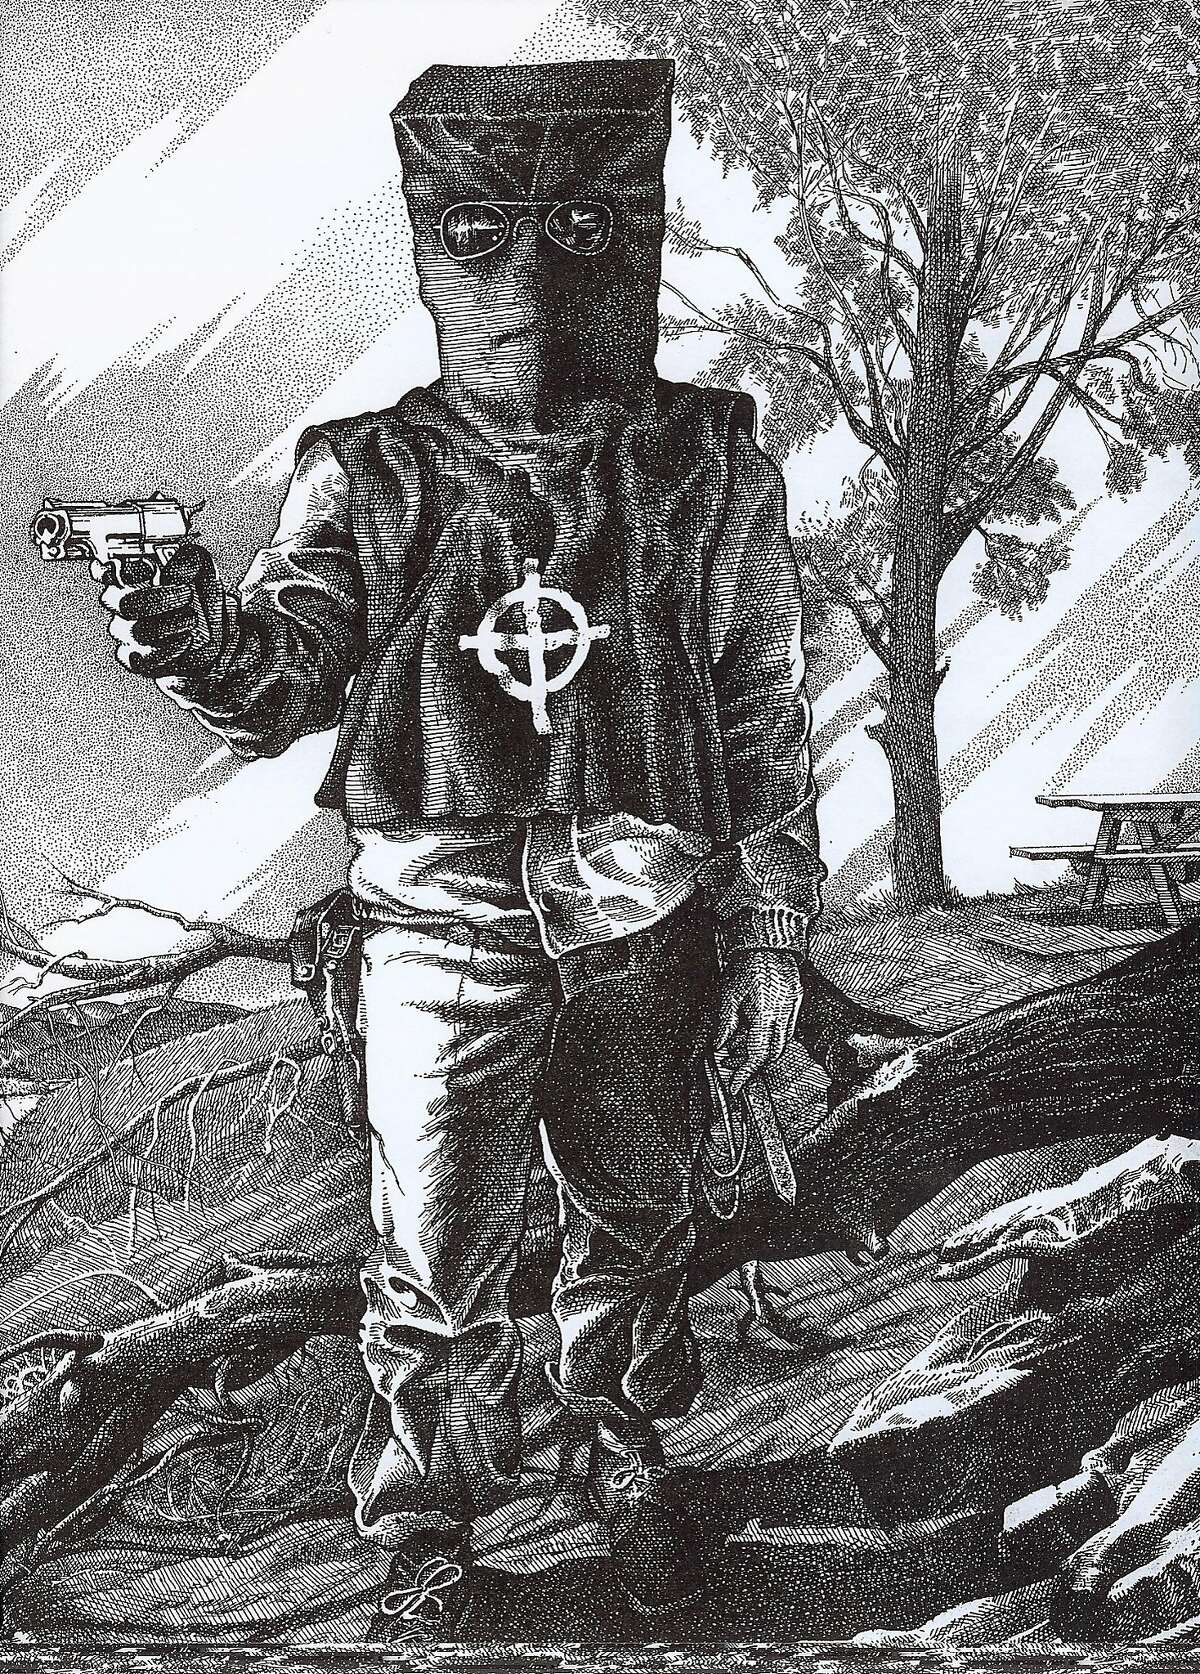 A drawing of the Zodiac Killer in costume at Lake Berryessa by former Chronicle cartoonist Robert Graysmith, whose authoritative books on the Zodiac would be published years later. The drawing is based on a description by Bryan Hartnell, who survived several stab wounds from the Zodiac’s attack on Sept. 27, 1969. Hartnell’s friend, Cecelia Shepard, died from her wounds. Photo: Courtesy Of Robert Graysmith 1969